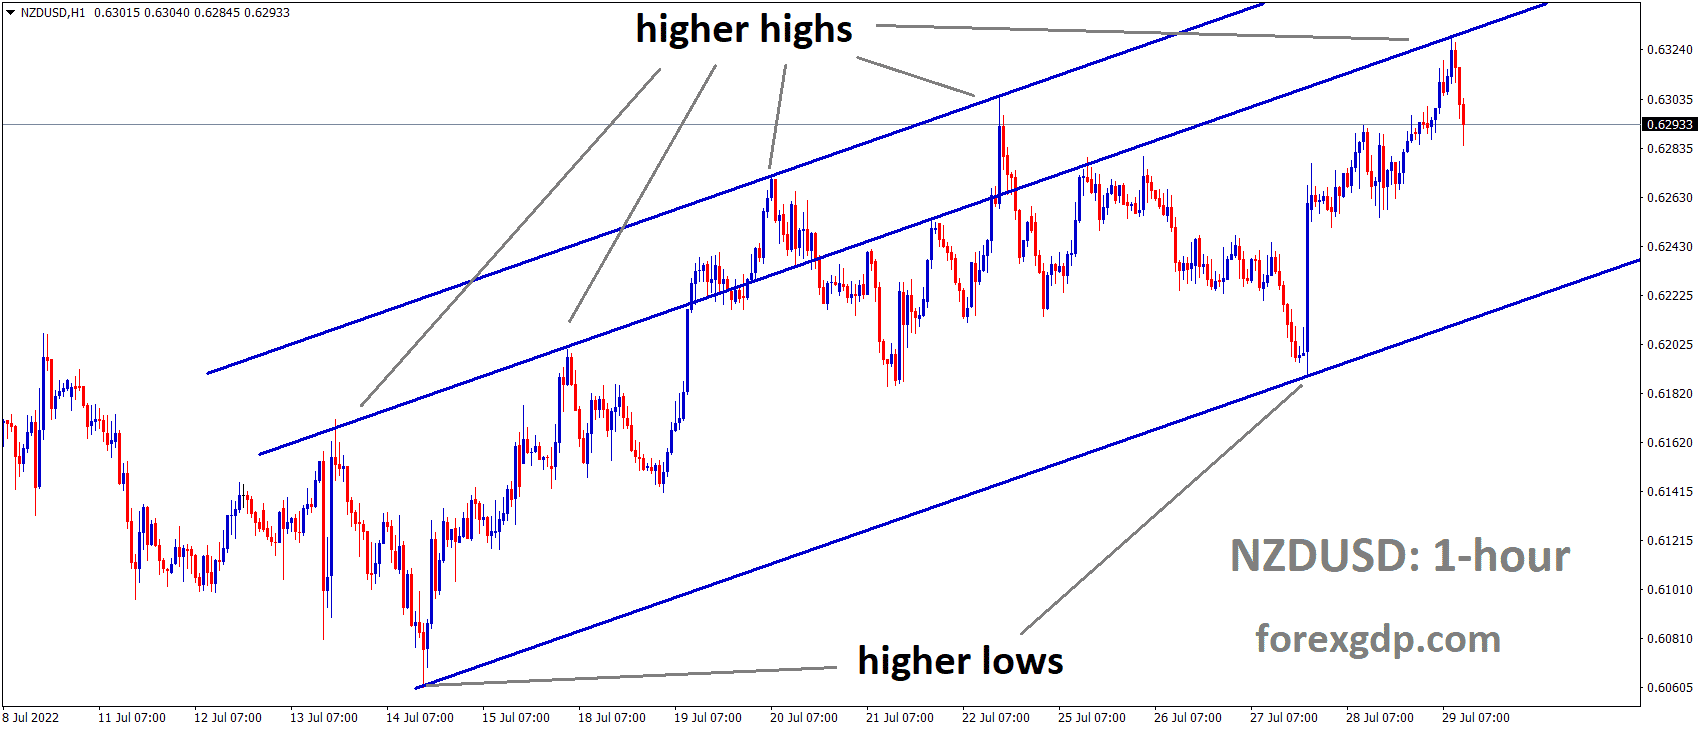 NZDUSD is moving in an Ascending channel and the Market has fallen from the higher high area of the channel 1